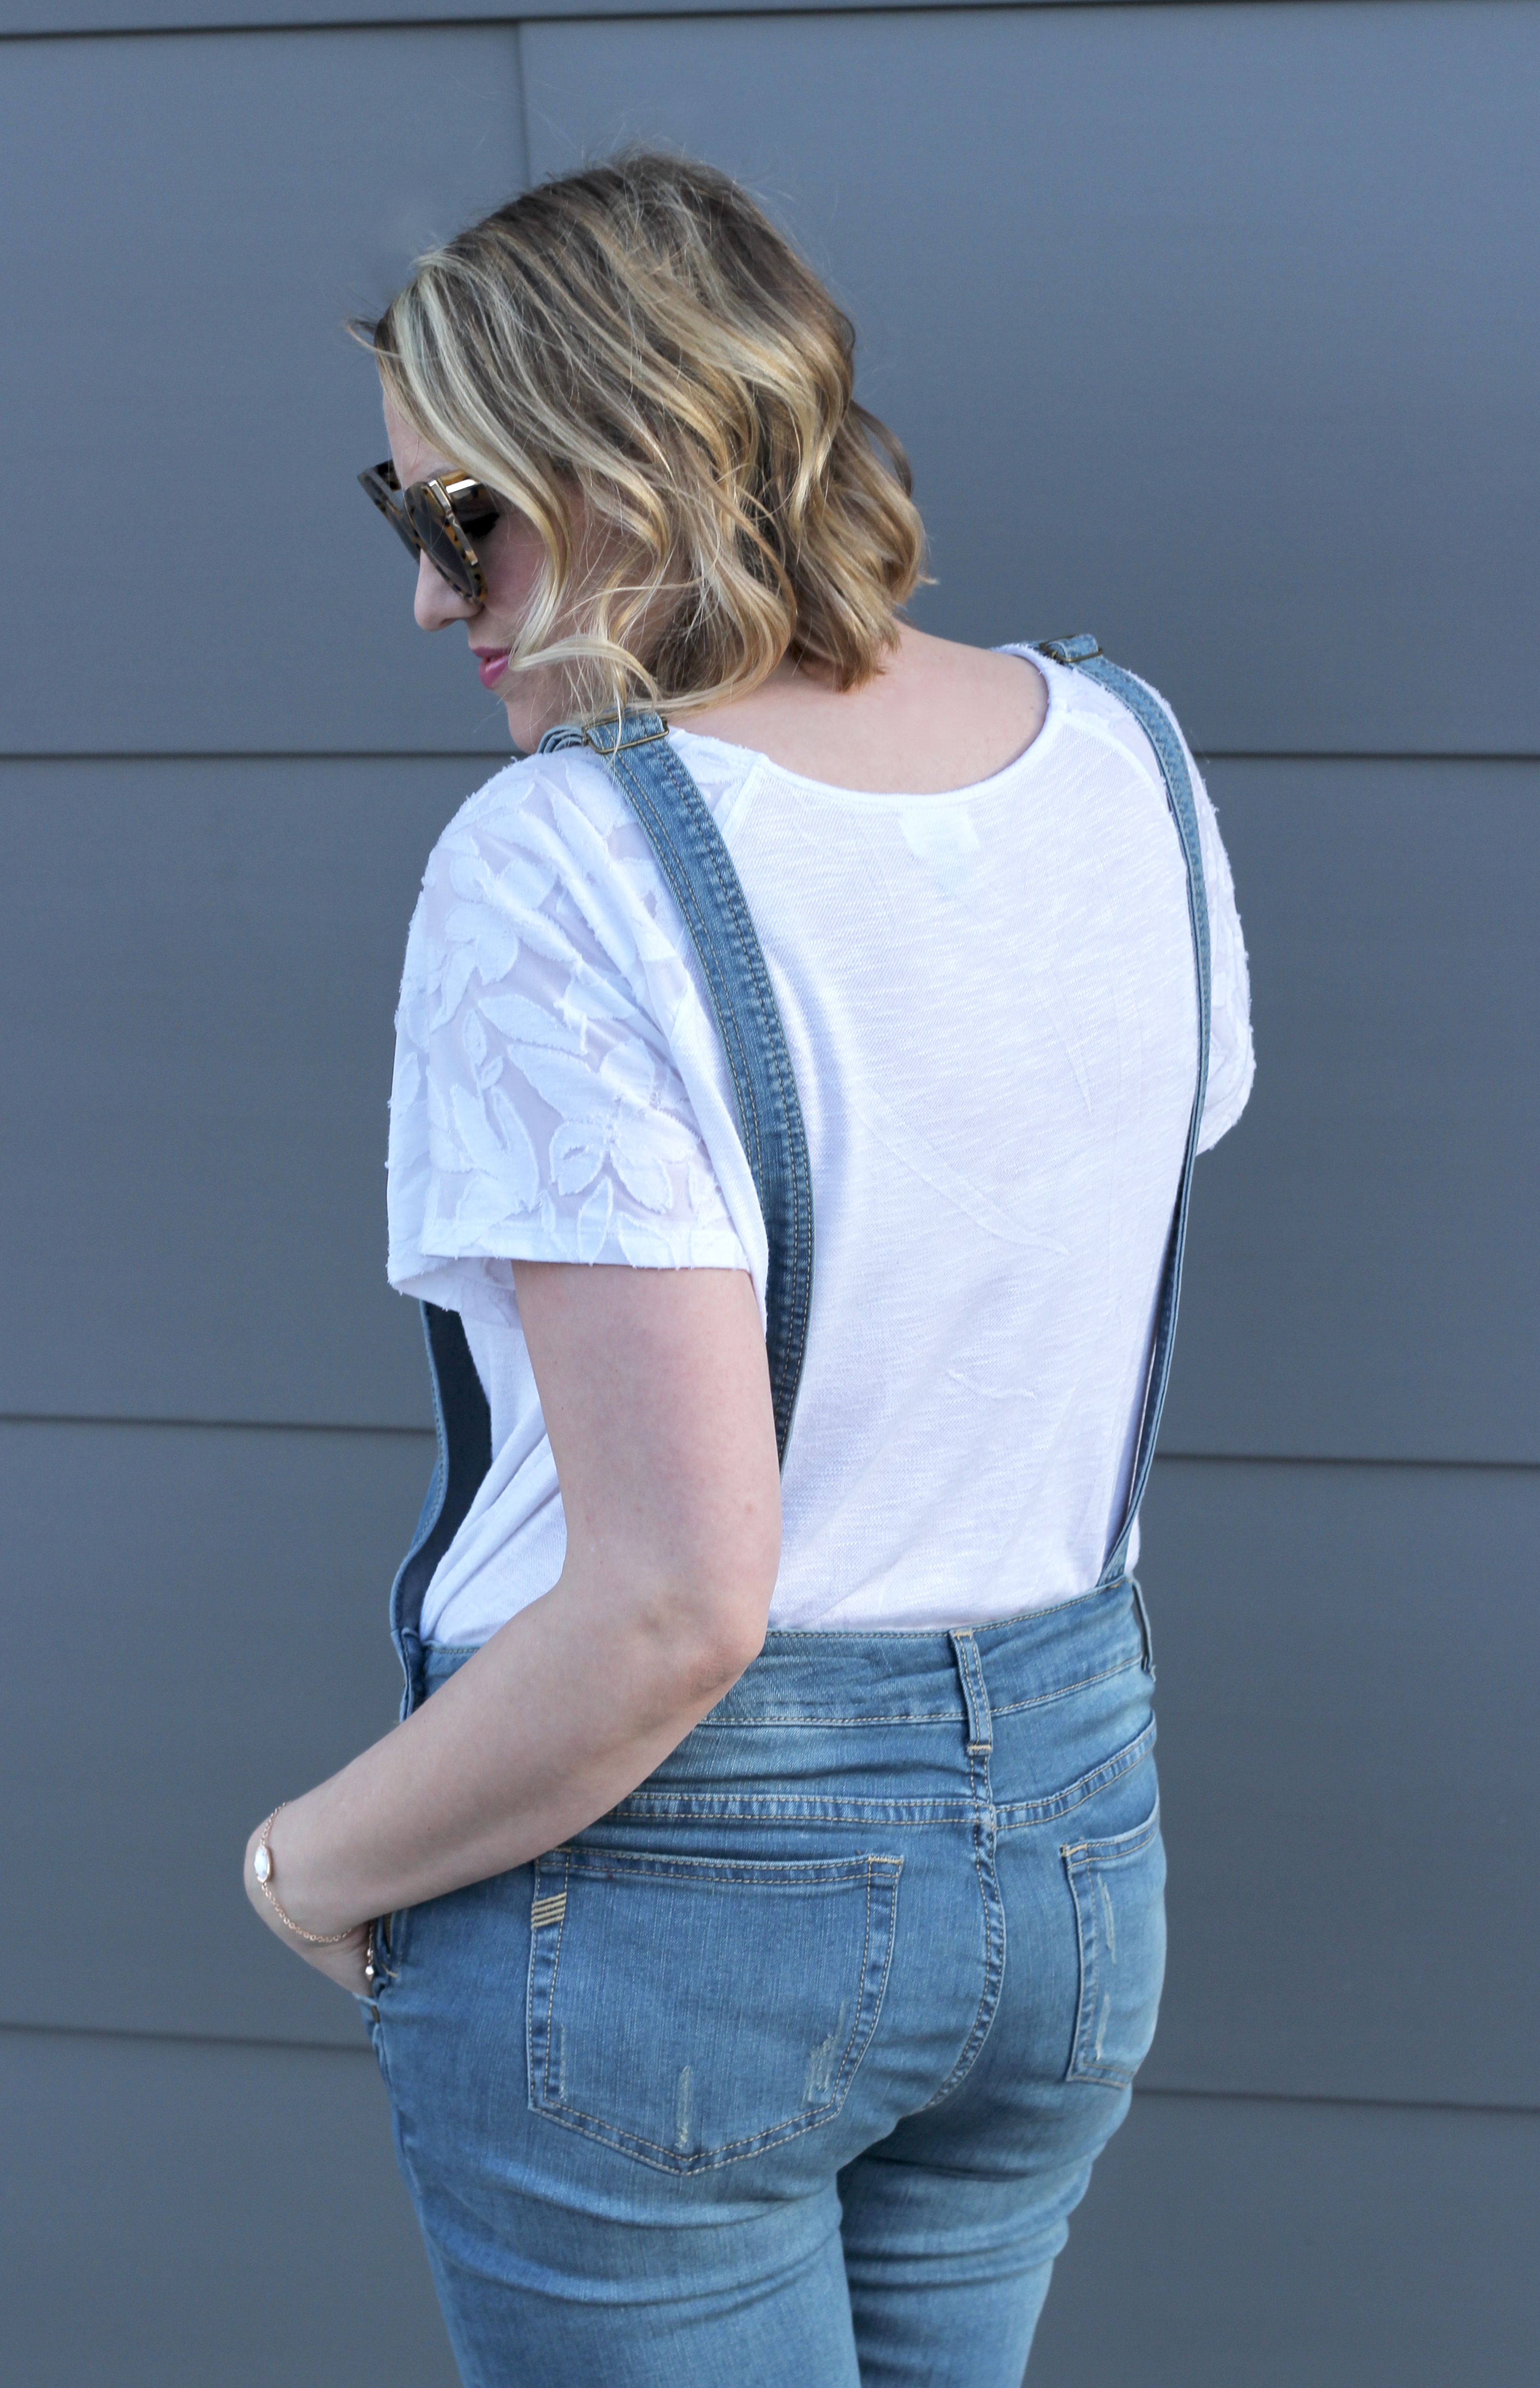 denim overalls outfit with a white flutter sleeve top